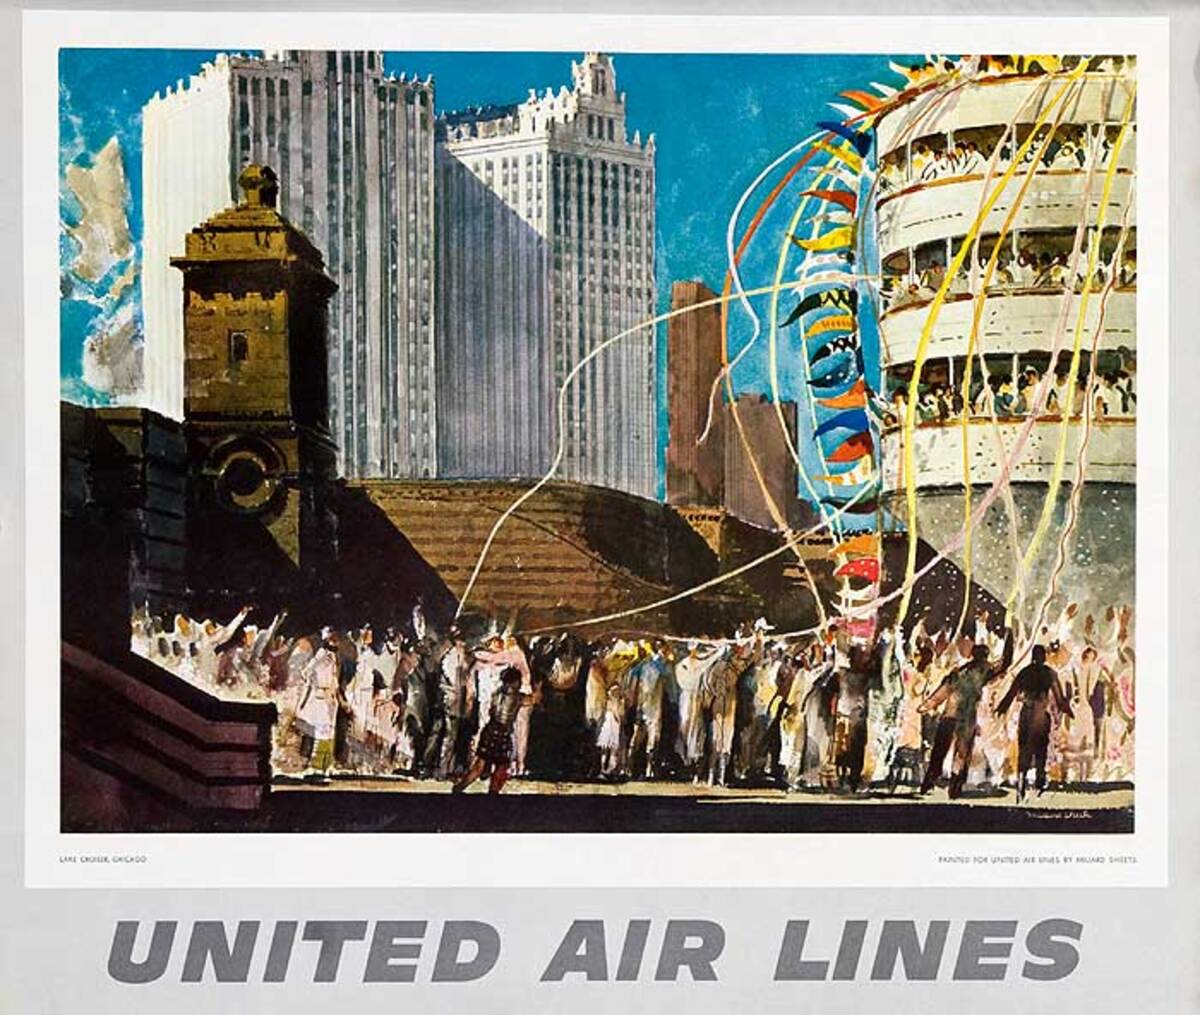 United Airlines Original Small Sized Poster Lake Cruiser Chicago Illinois